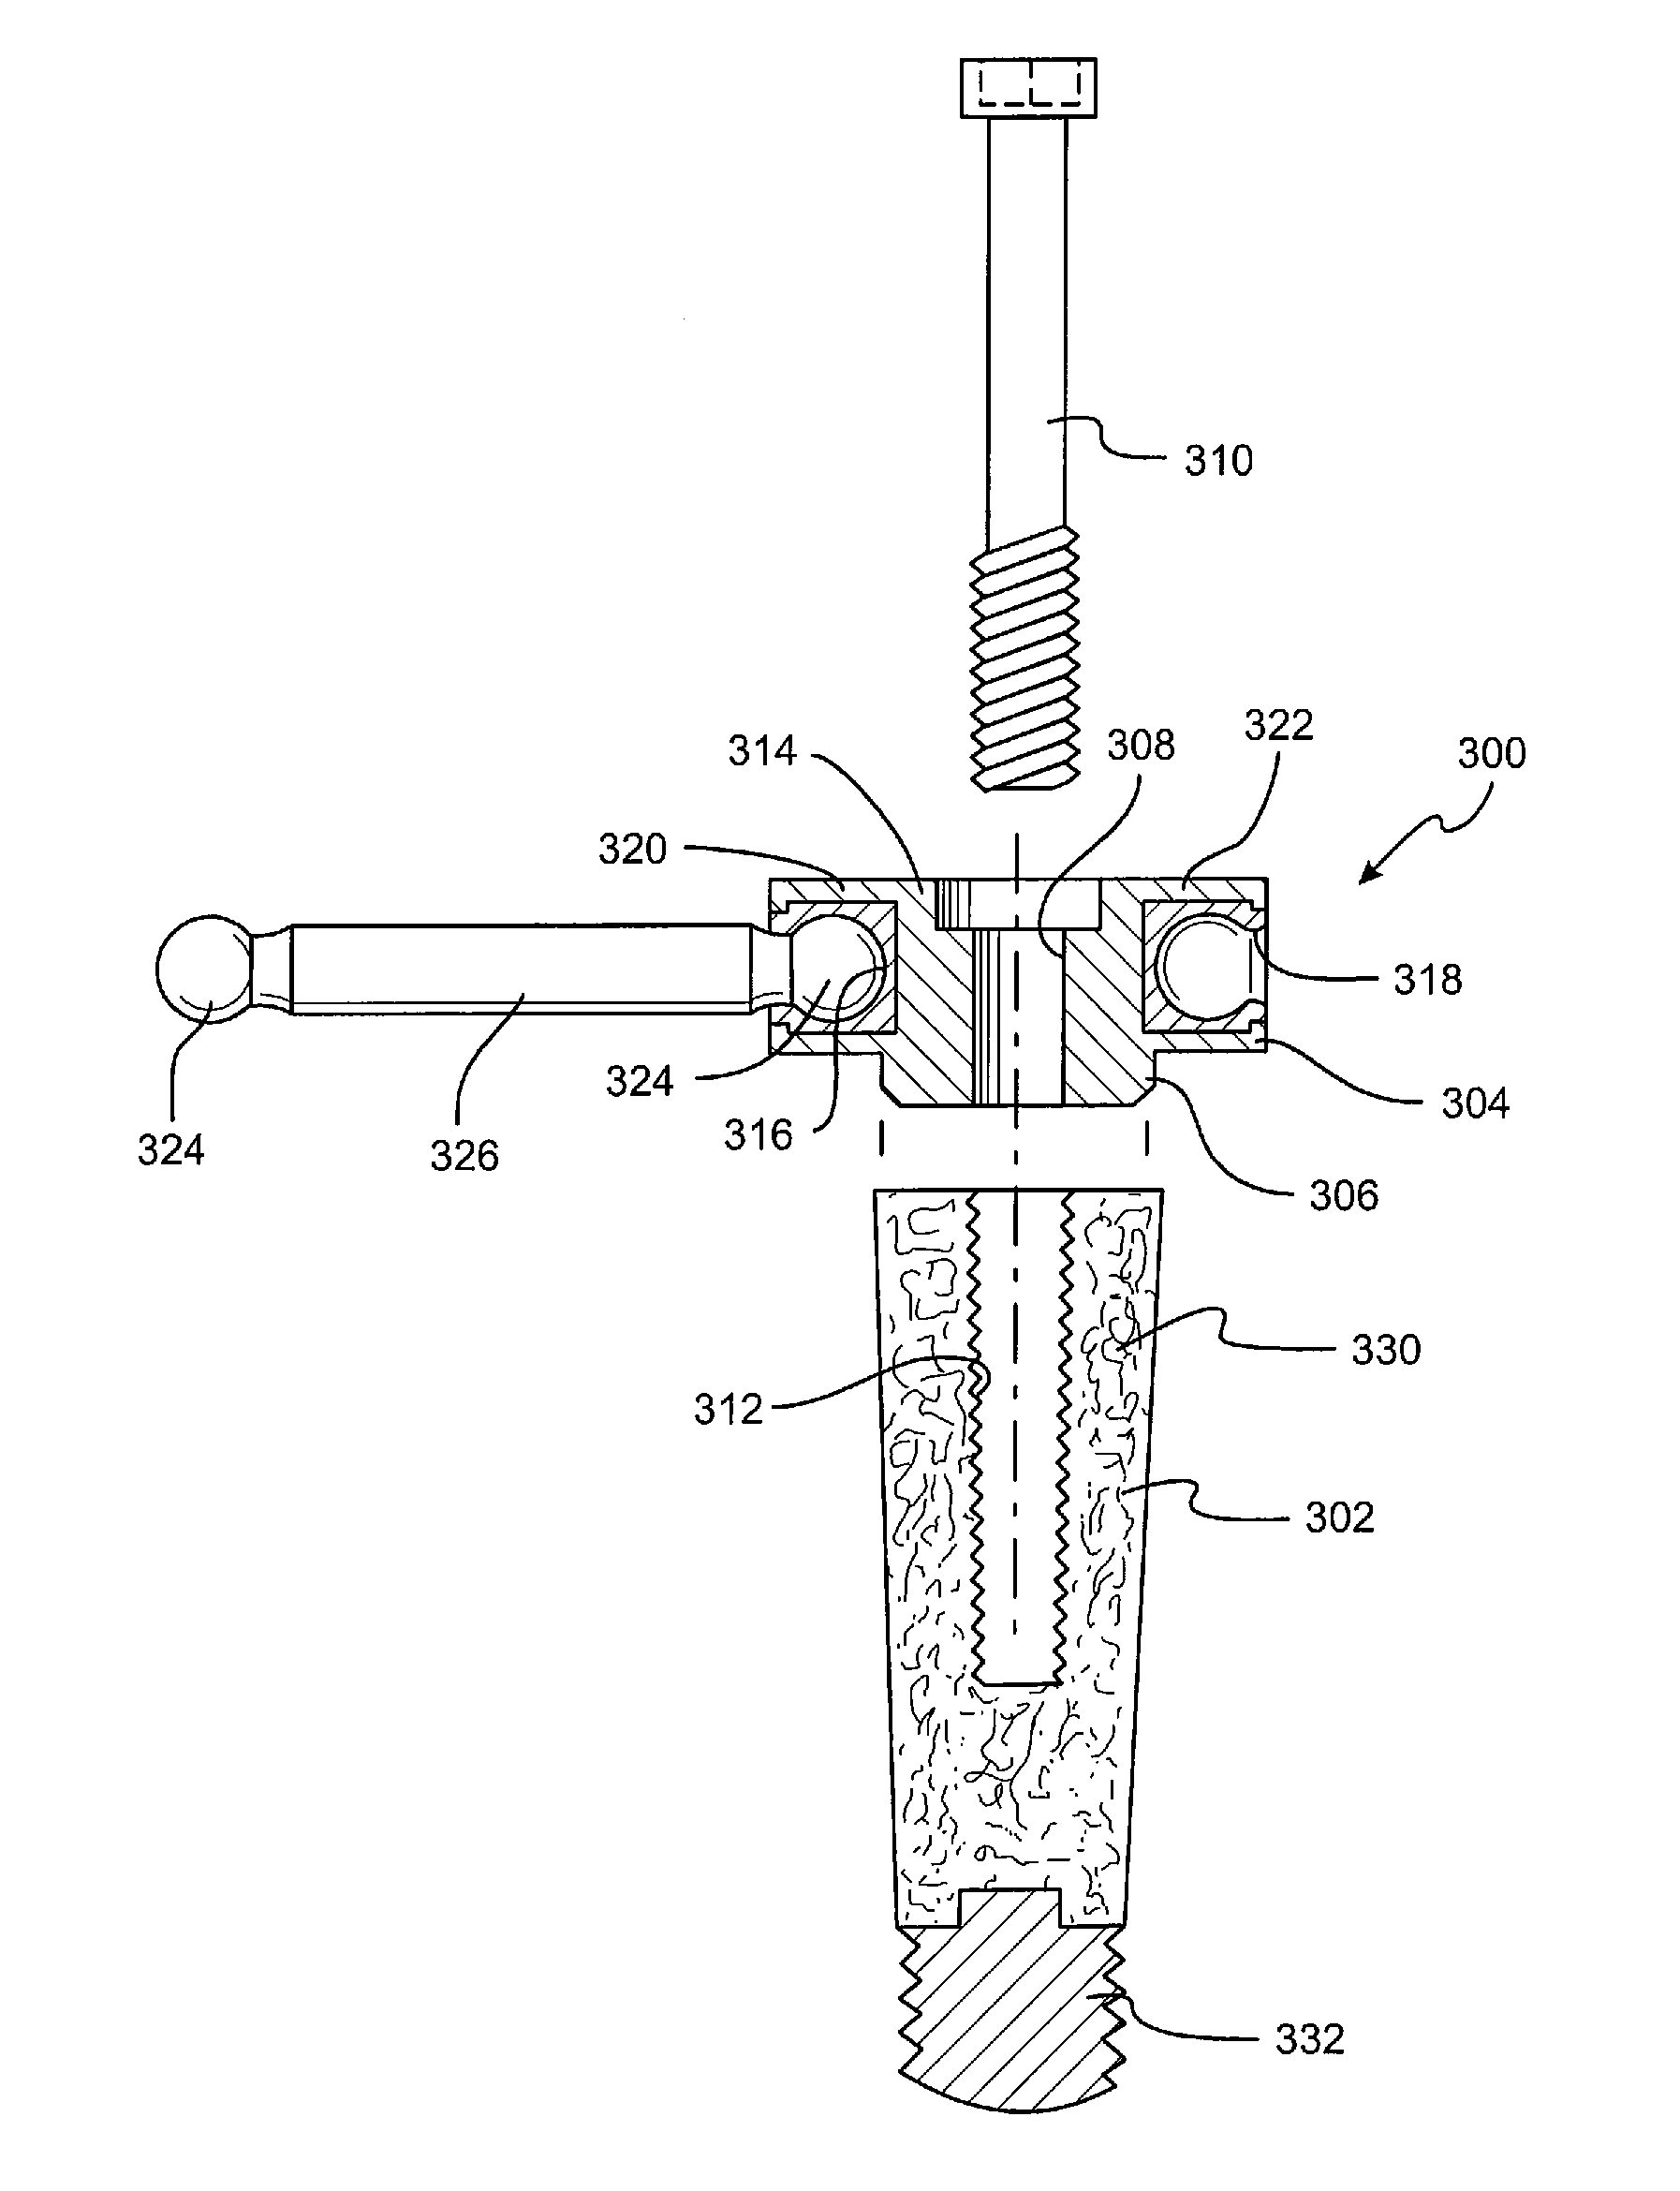 Porous Implant Device for Supporting a Denture